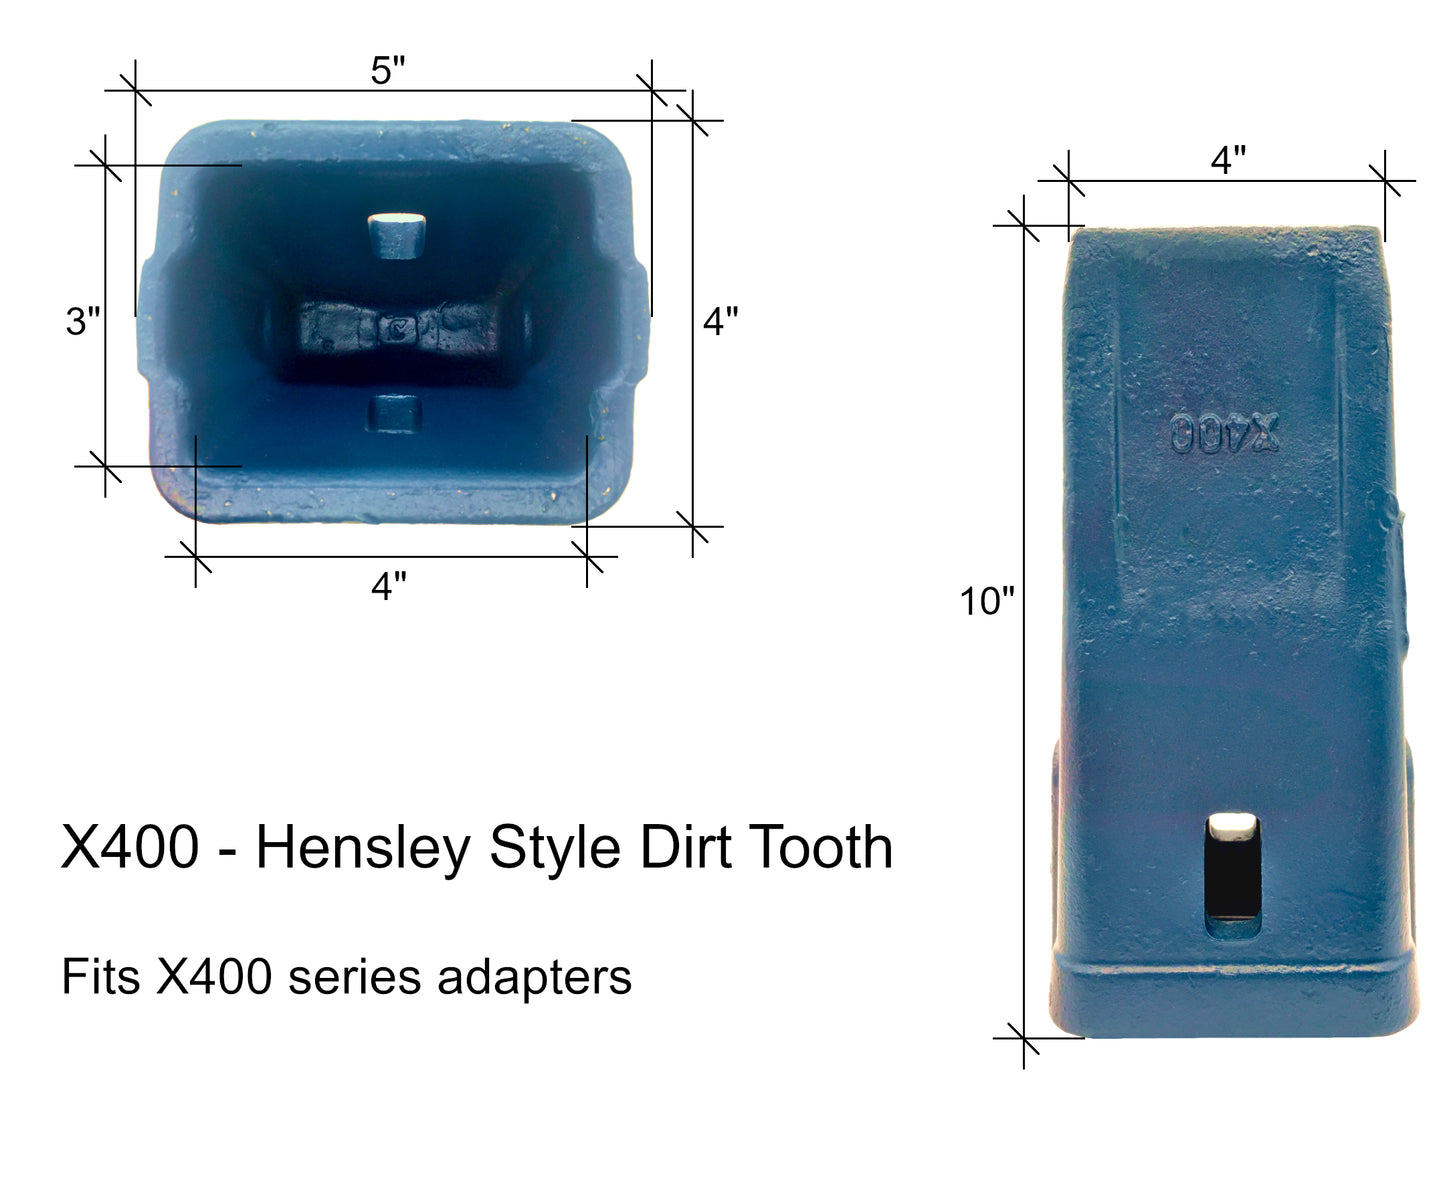 X400 Standard Dirt Tooth - 'Hensley X400 Style' for Excavator Buckets